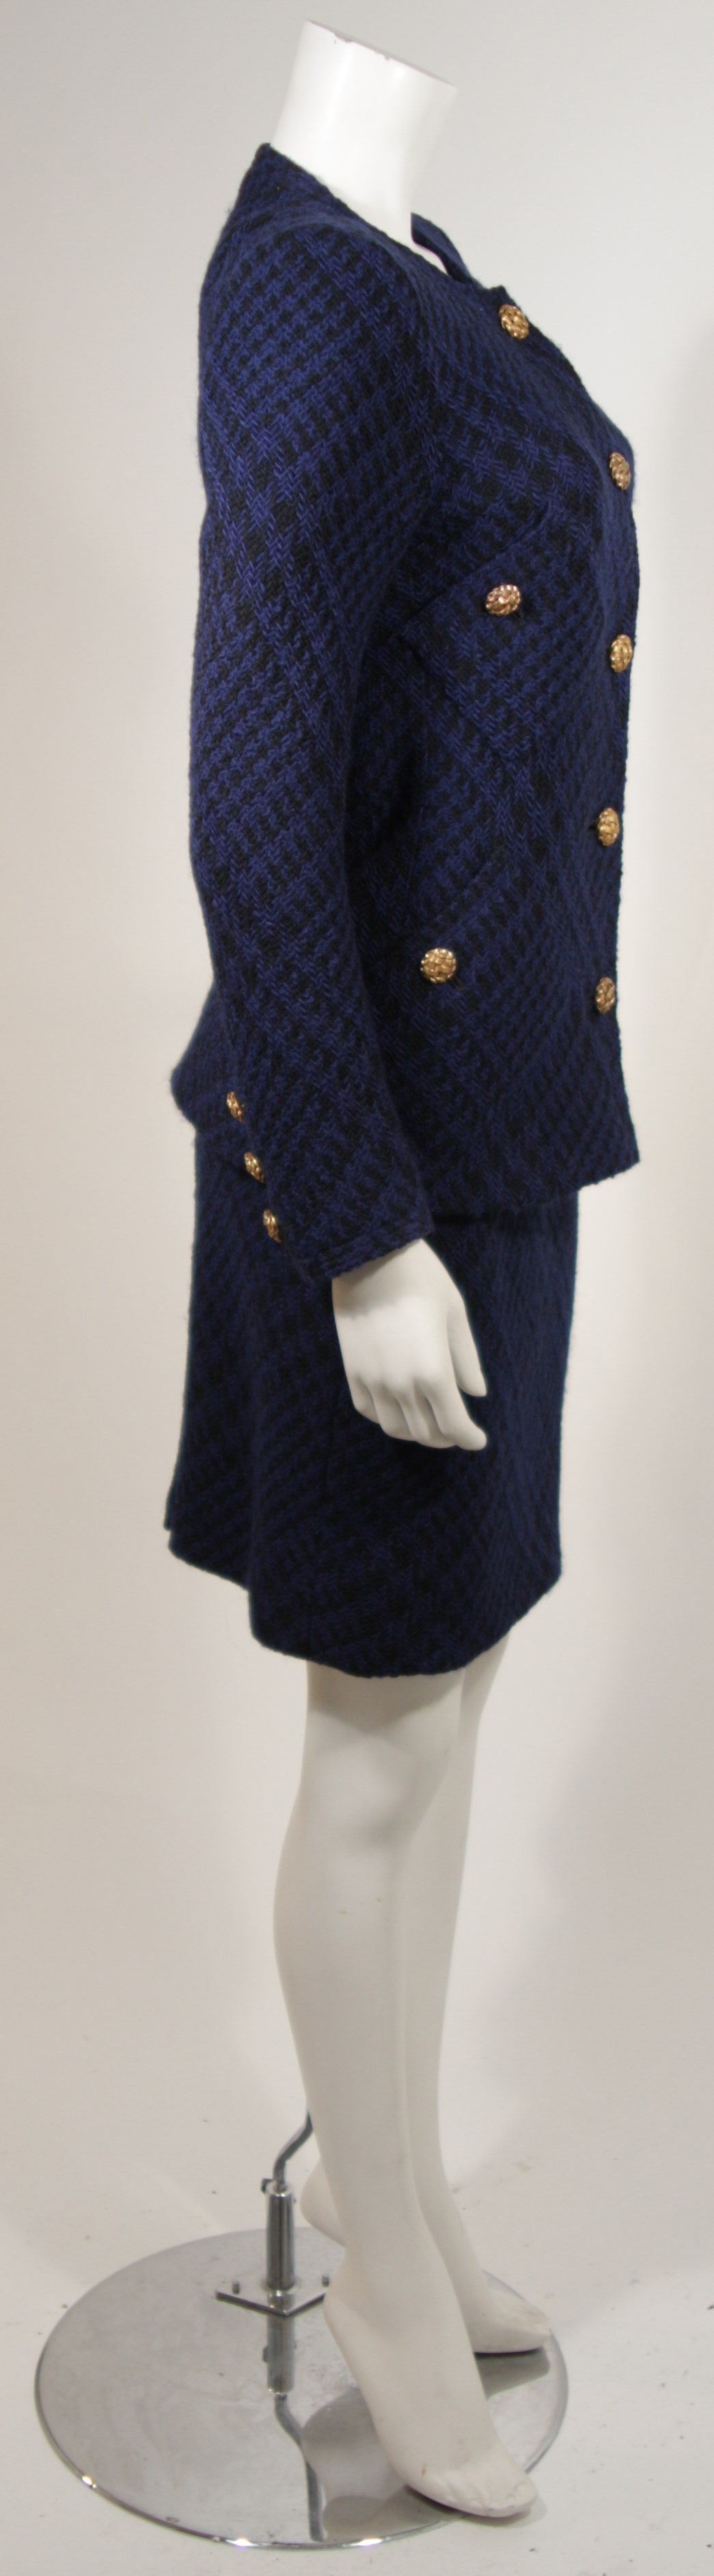 1980's Chanel Haute Couture Blue and Black Tweed Skirt Suit Size 4 1